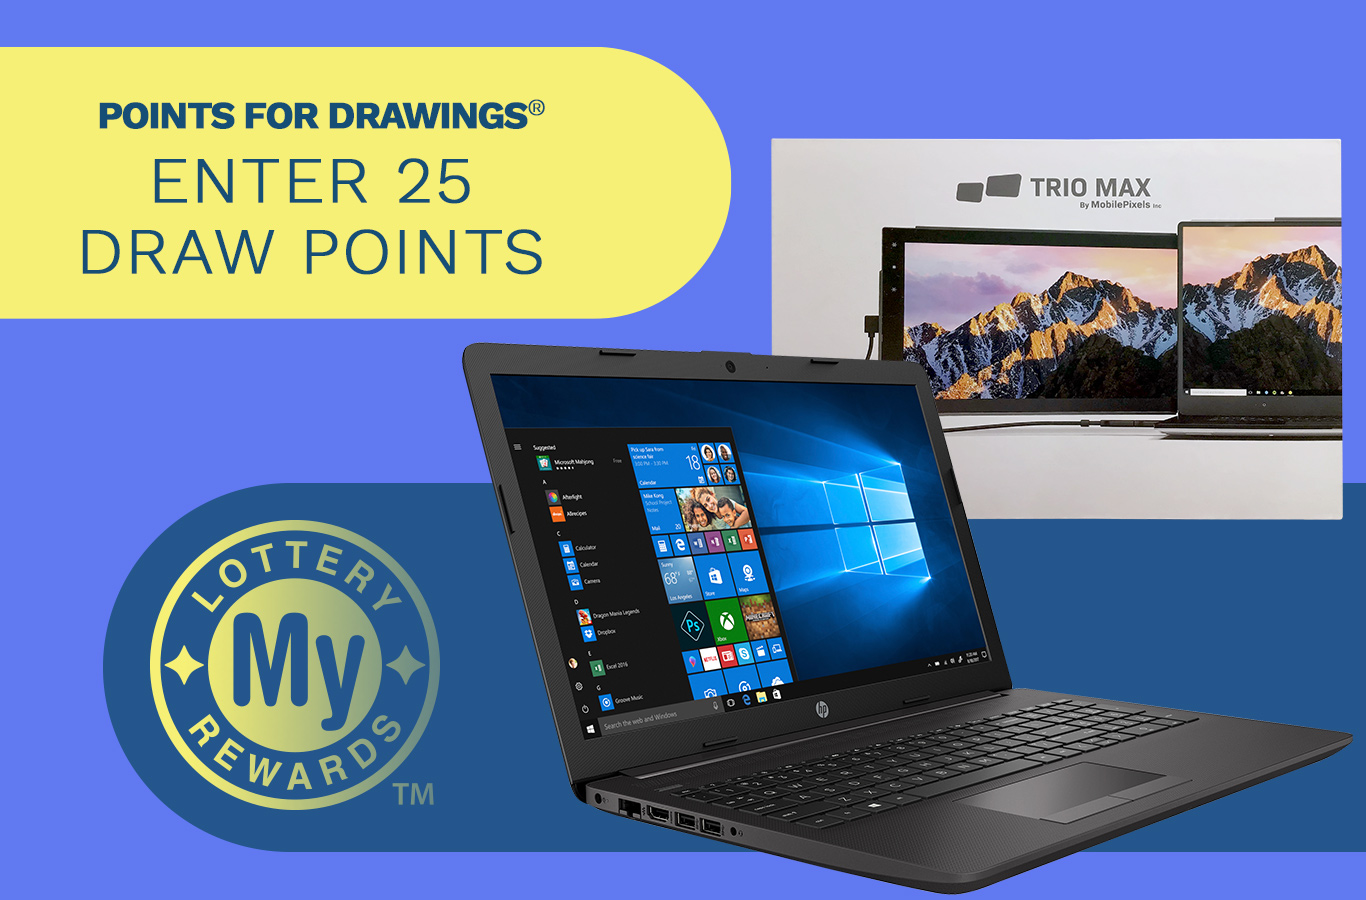 Here's your chance to win a HP® Notebook Package! Enter by Wednesday, August 16th.